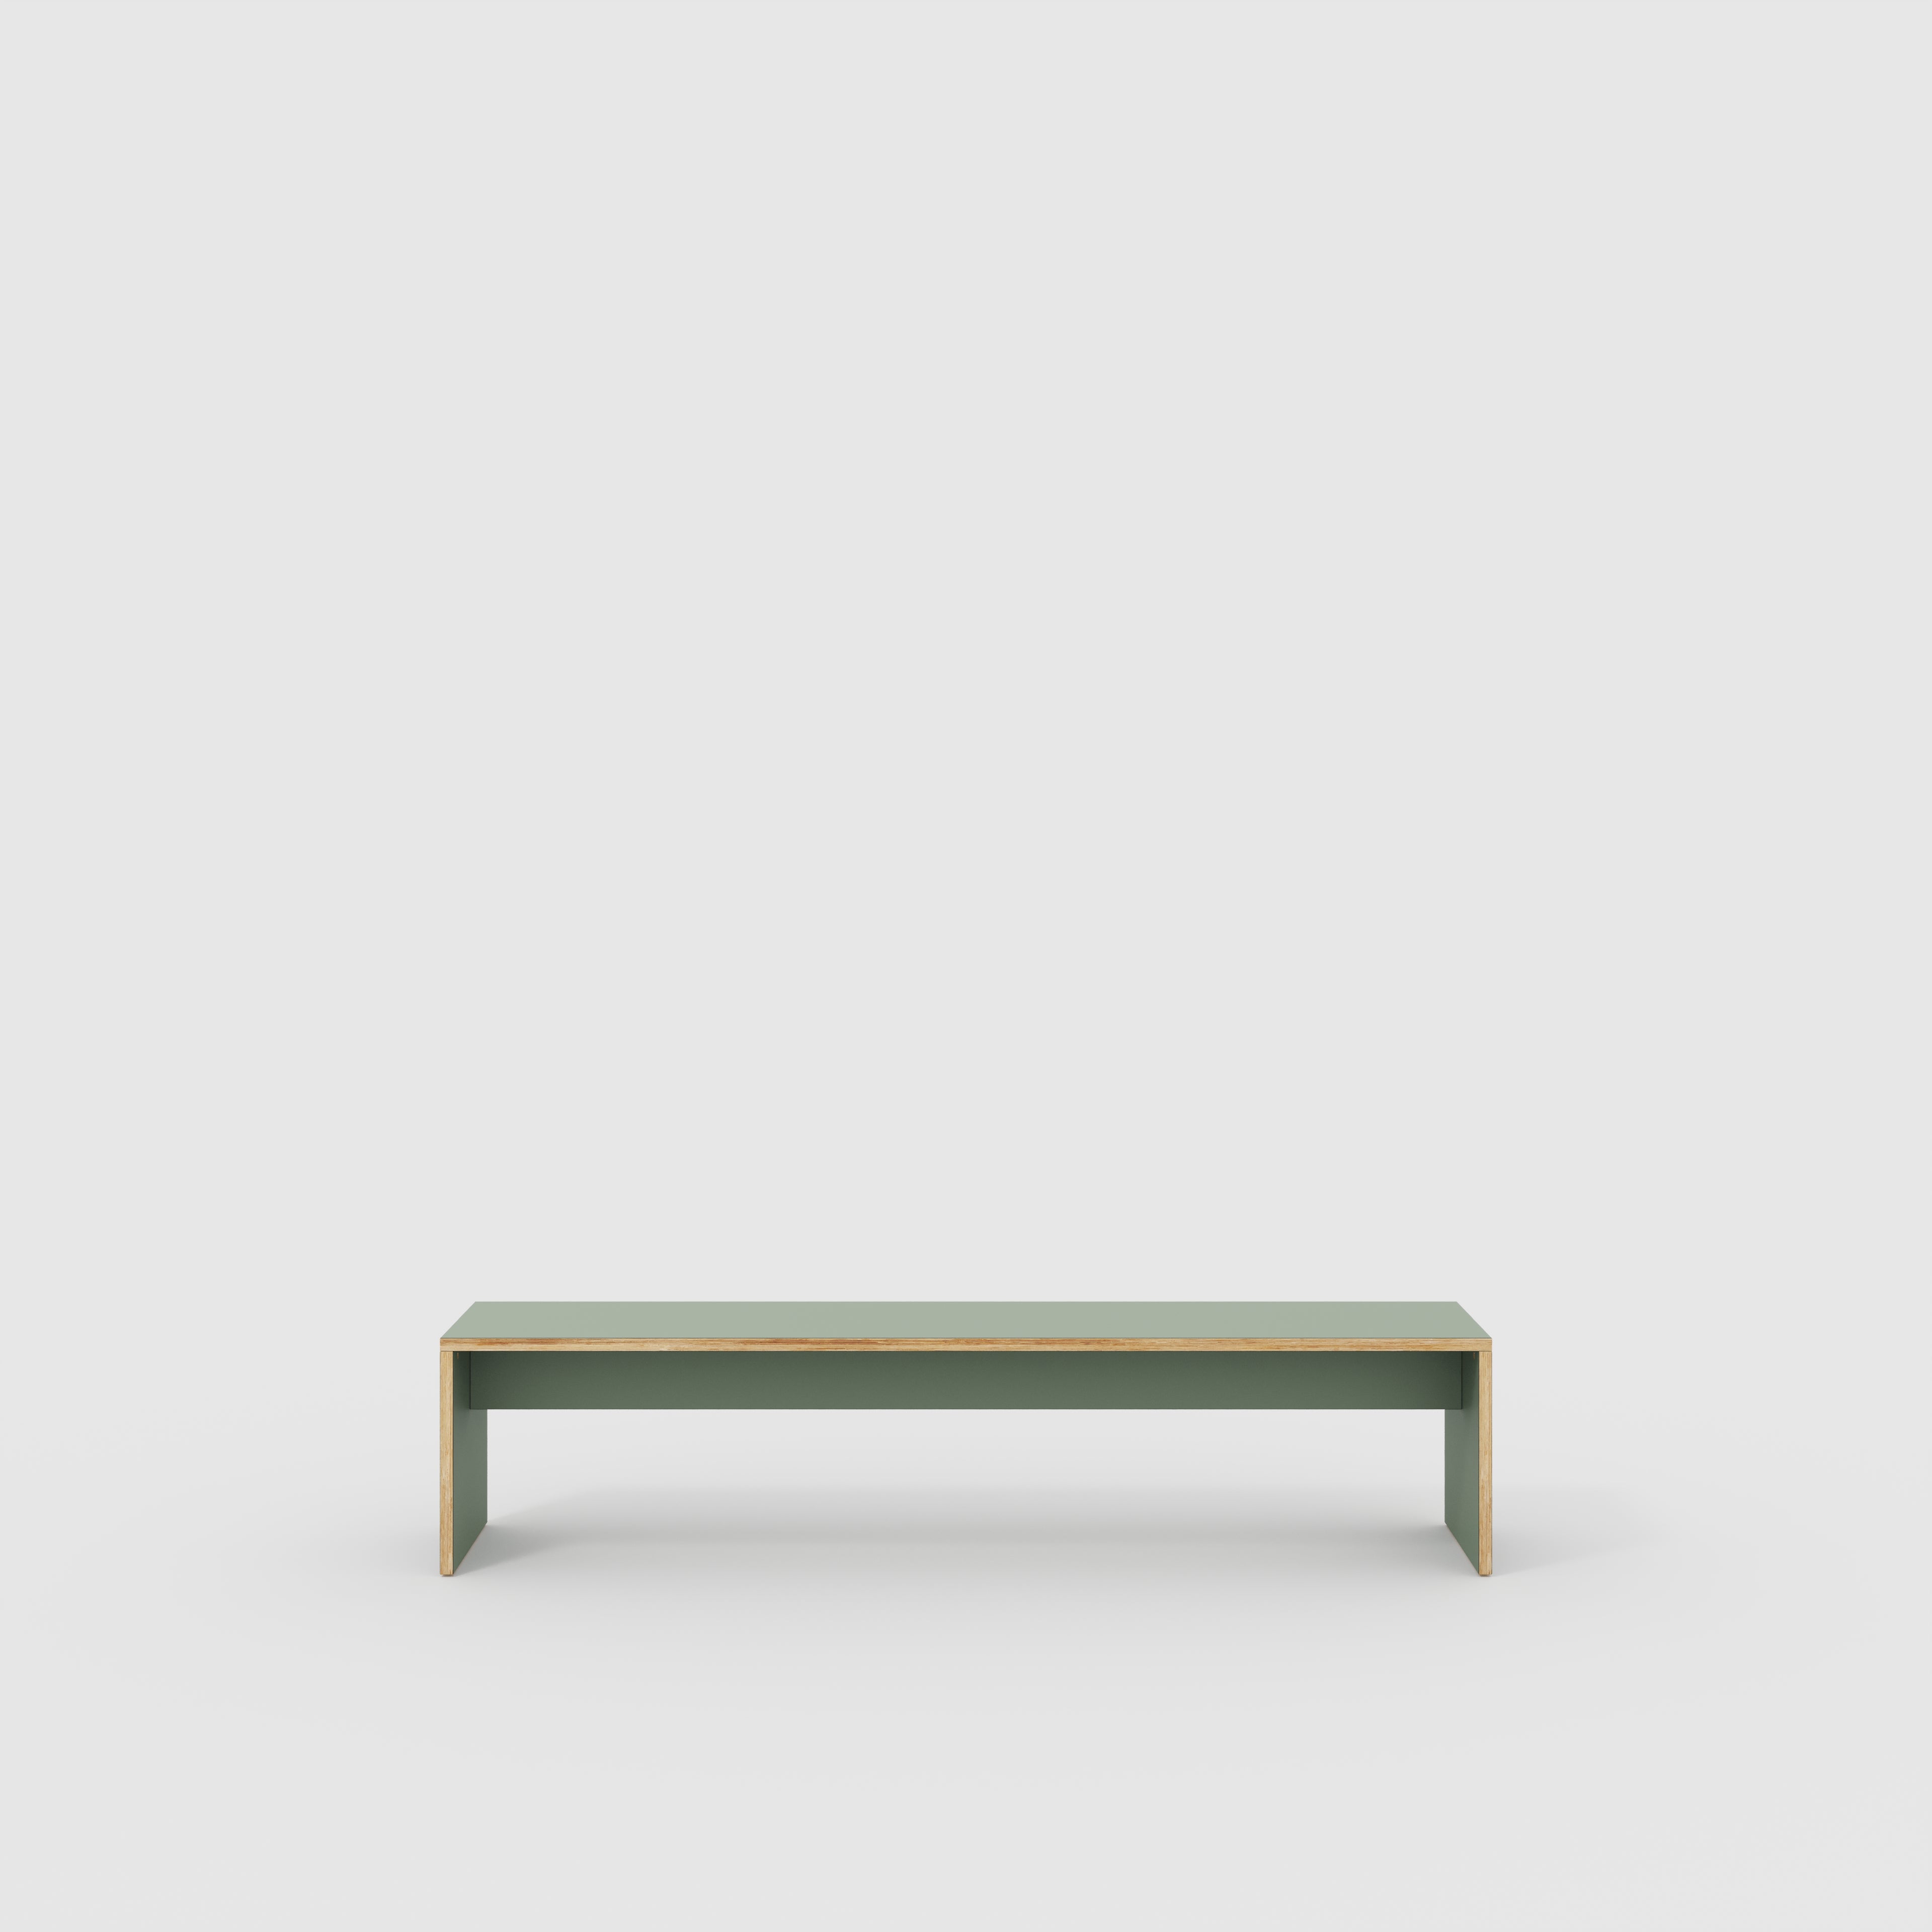 Bench Seat with Solid Sides - Formica Green Slate - 2000(w) x 400(d)